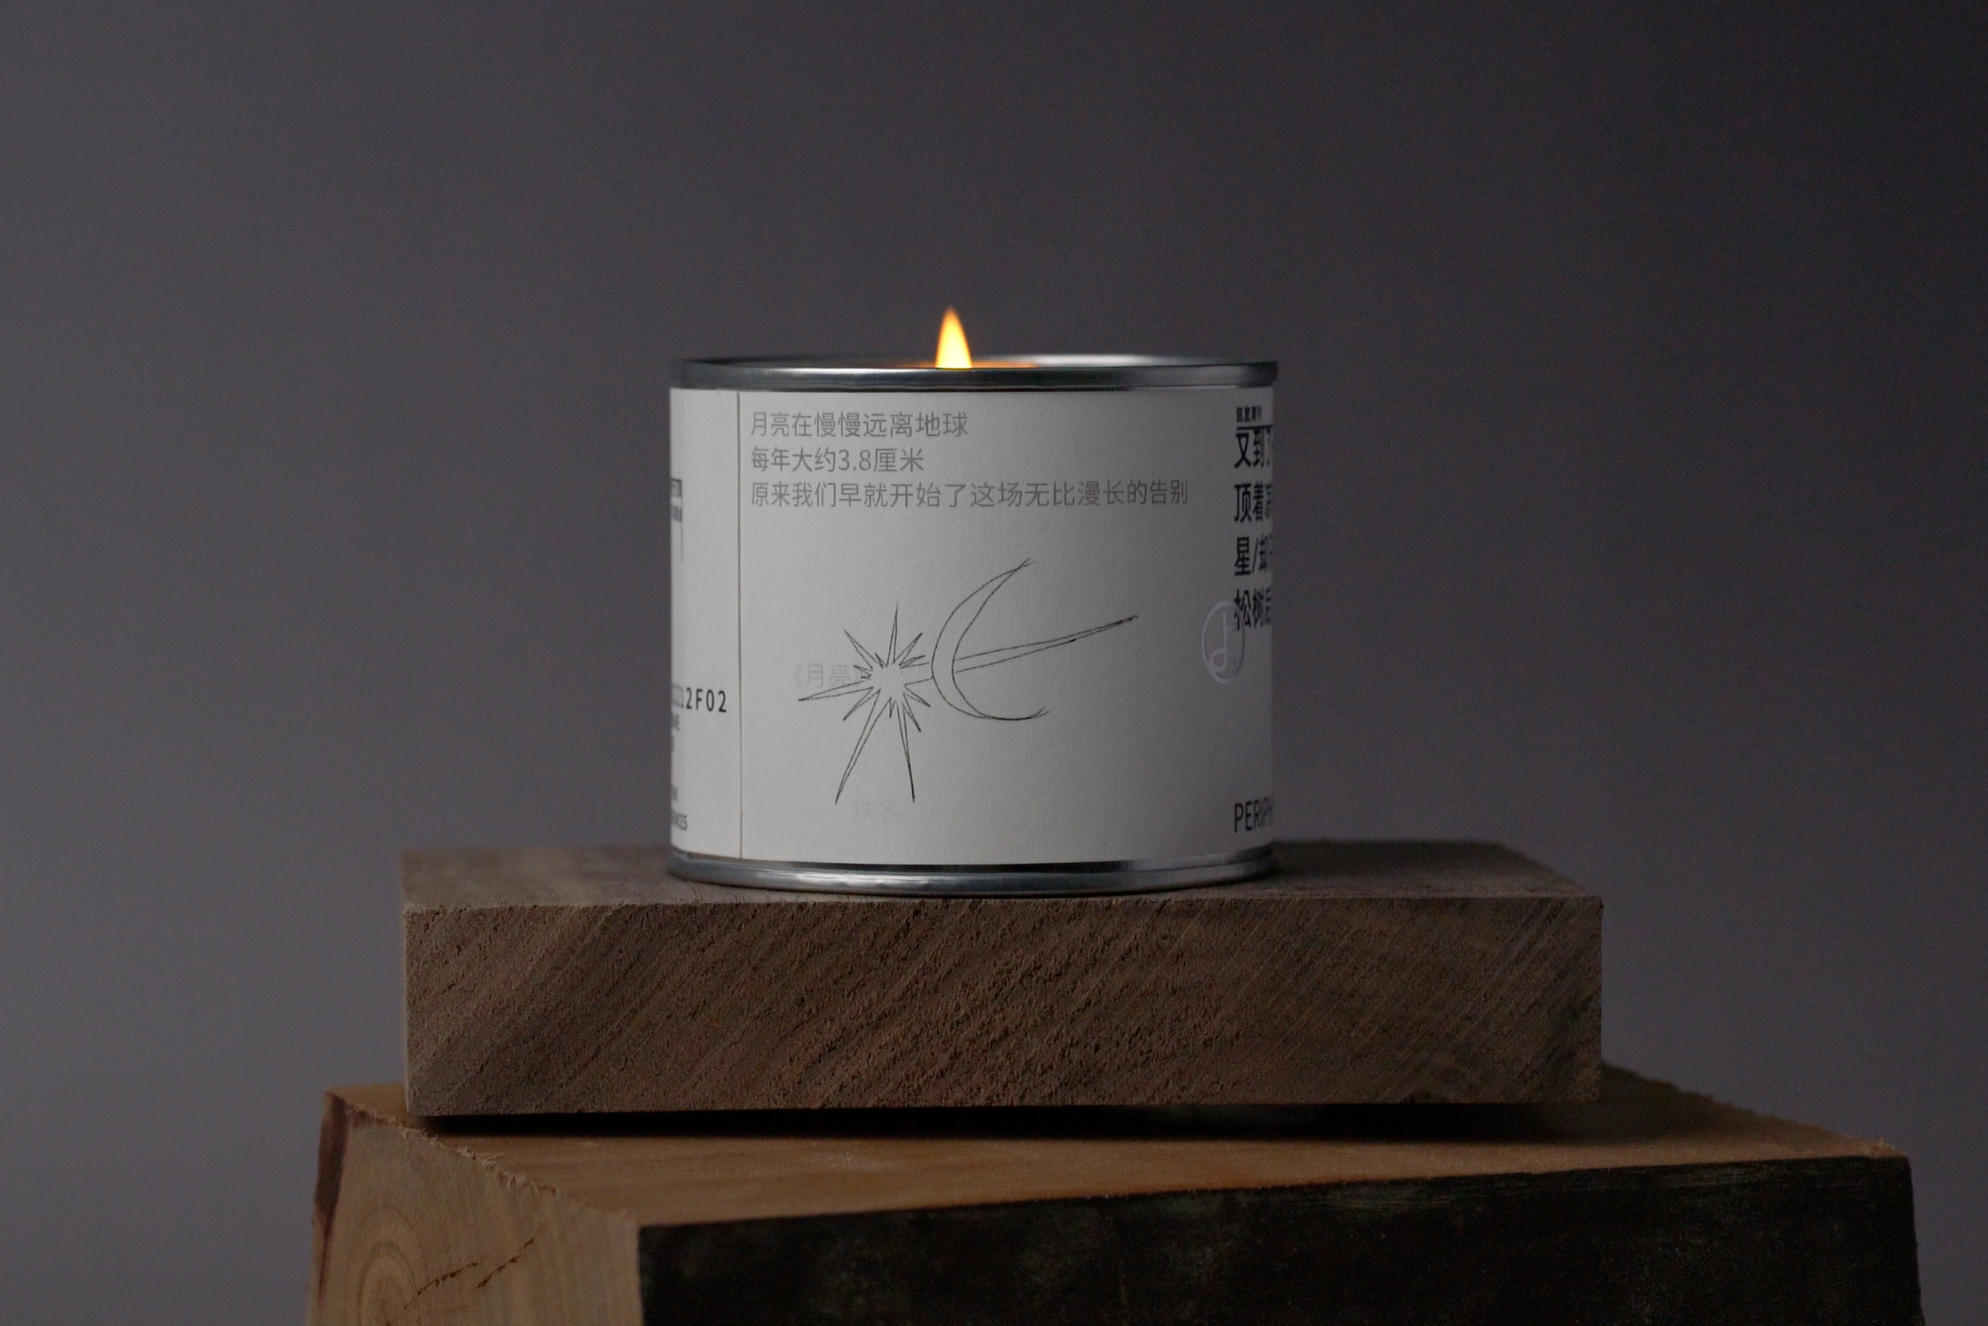 London Design Awards Winner - A few lines of verse and a can of burning solids